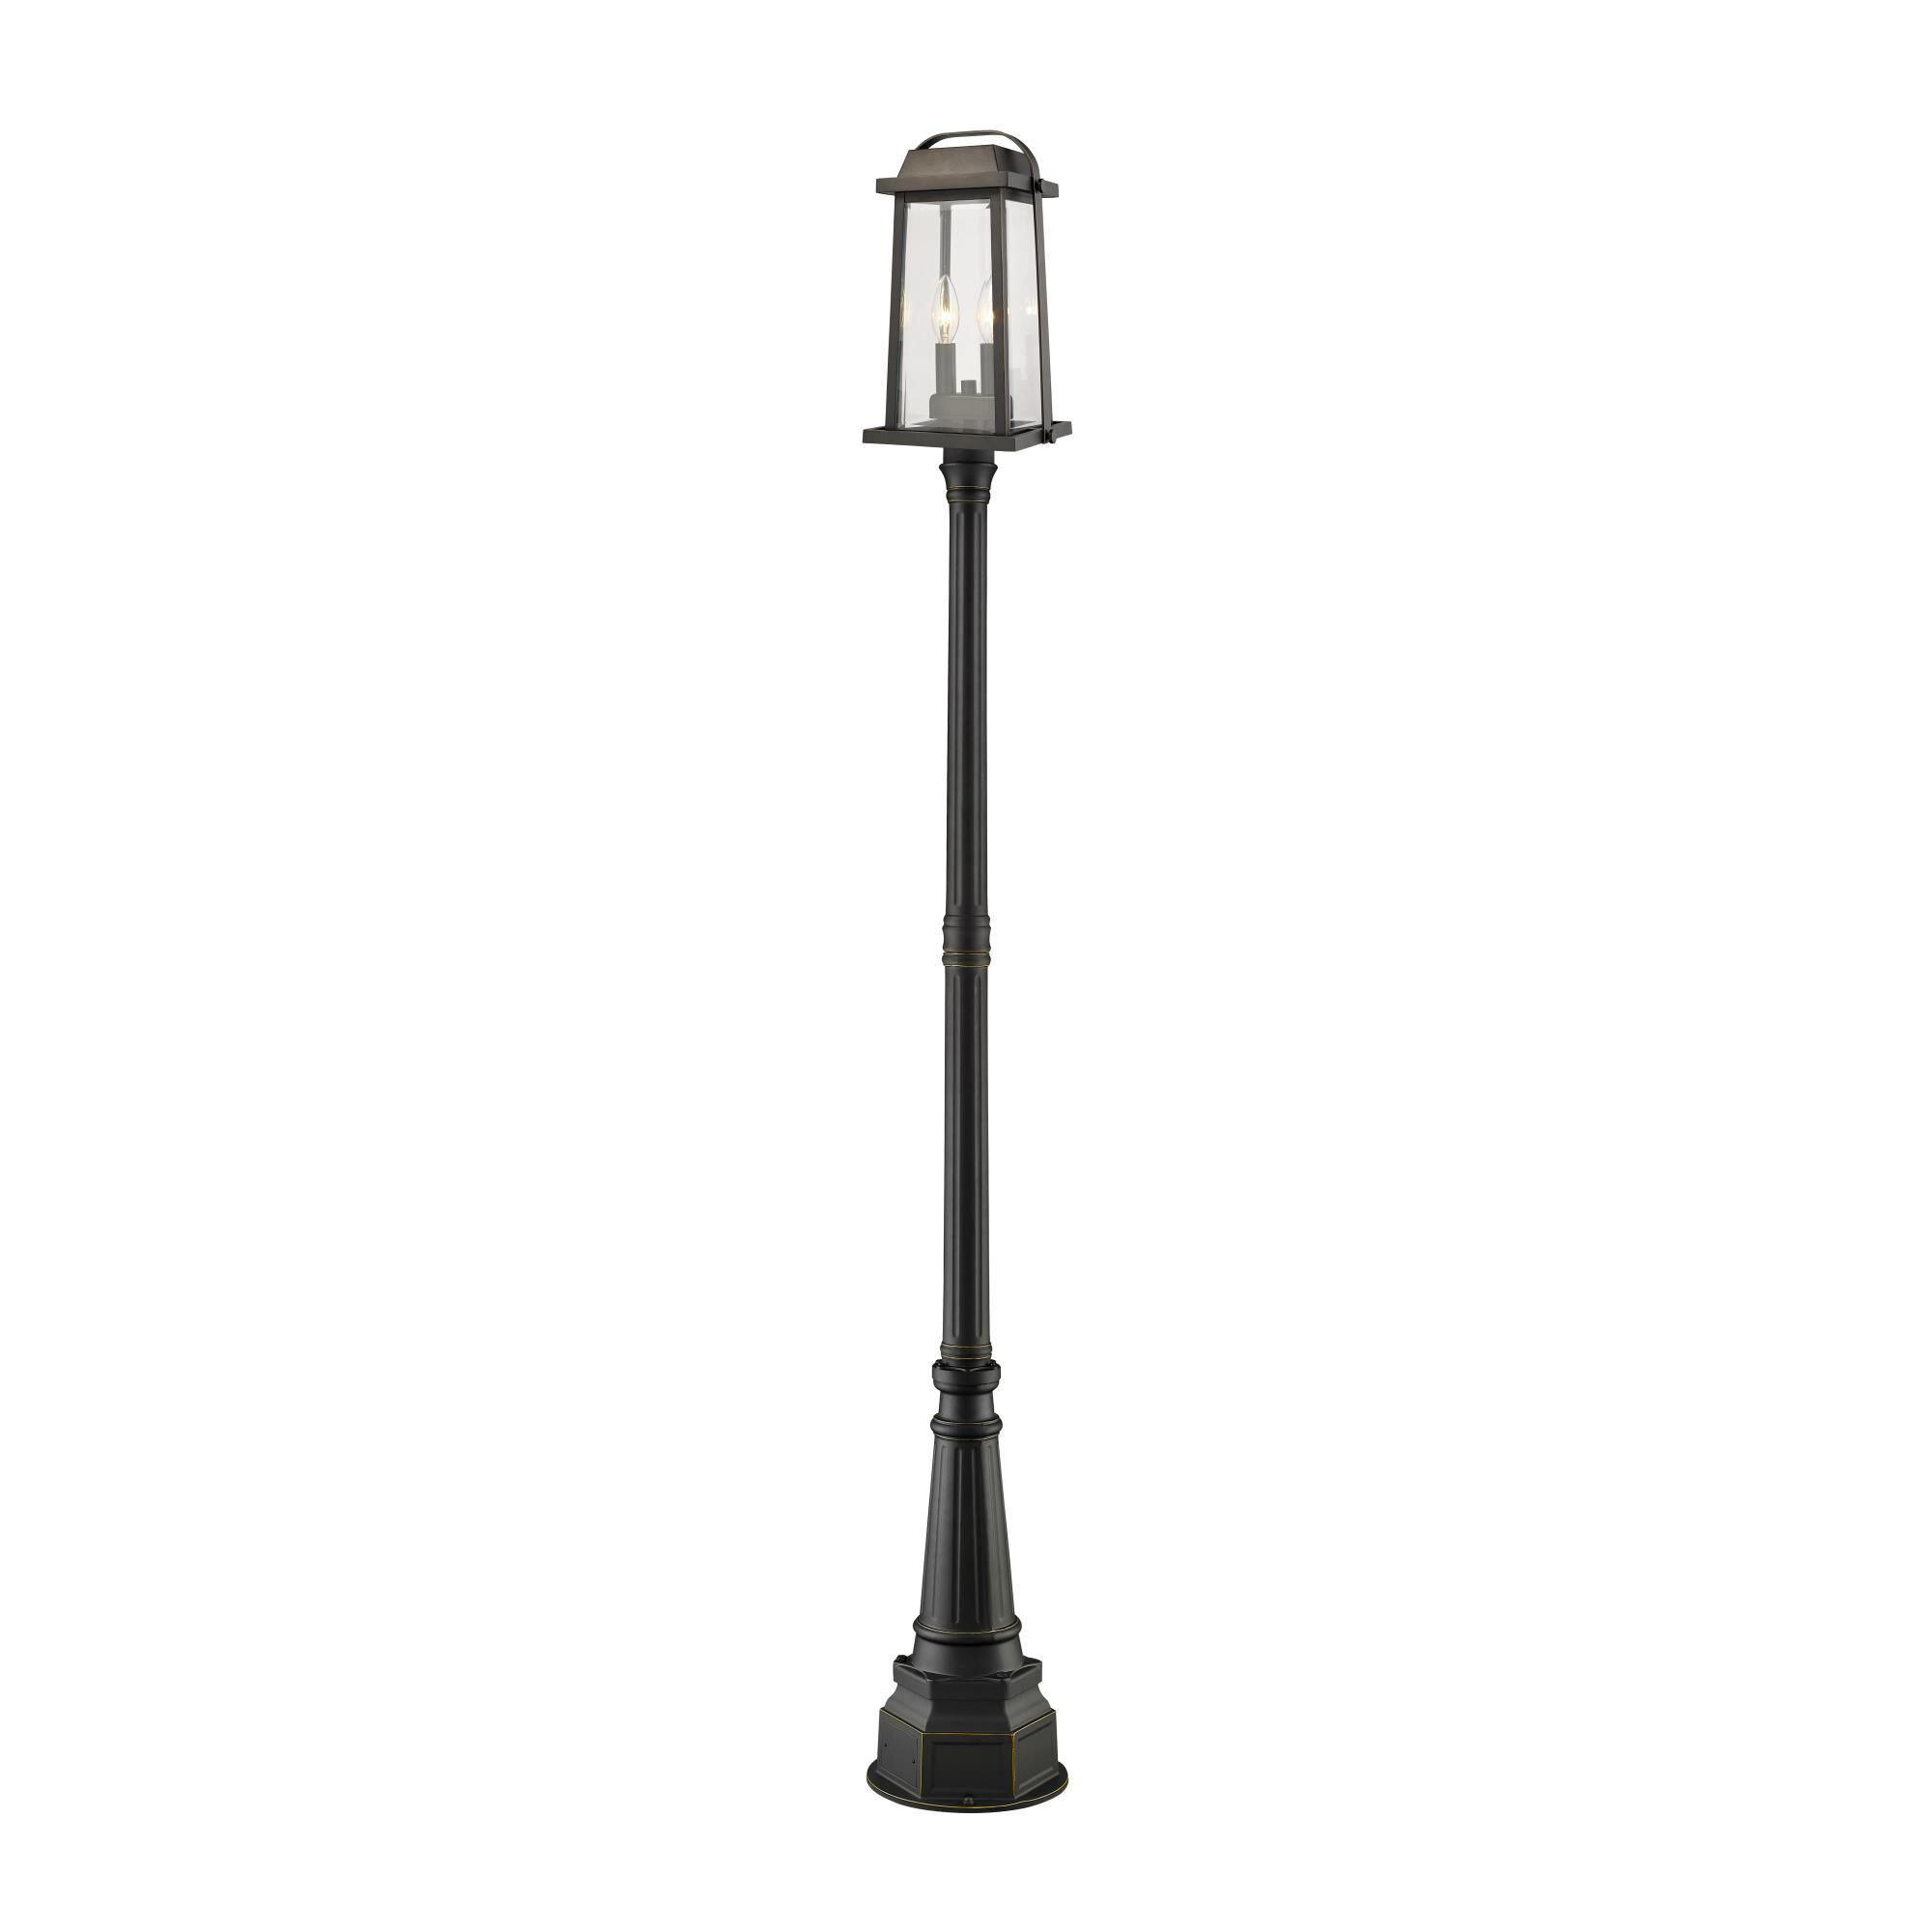 Photos - Floodlight / Garden Lamps Z-Lite Millworks 97 Inch Tall 2 Light Outdoor Post Lamp Millworks - 574PHM